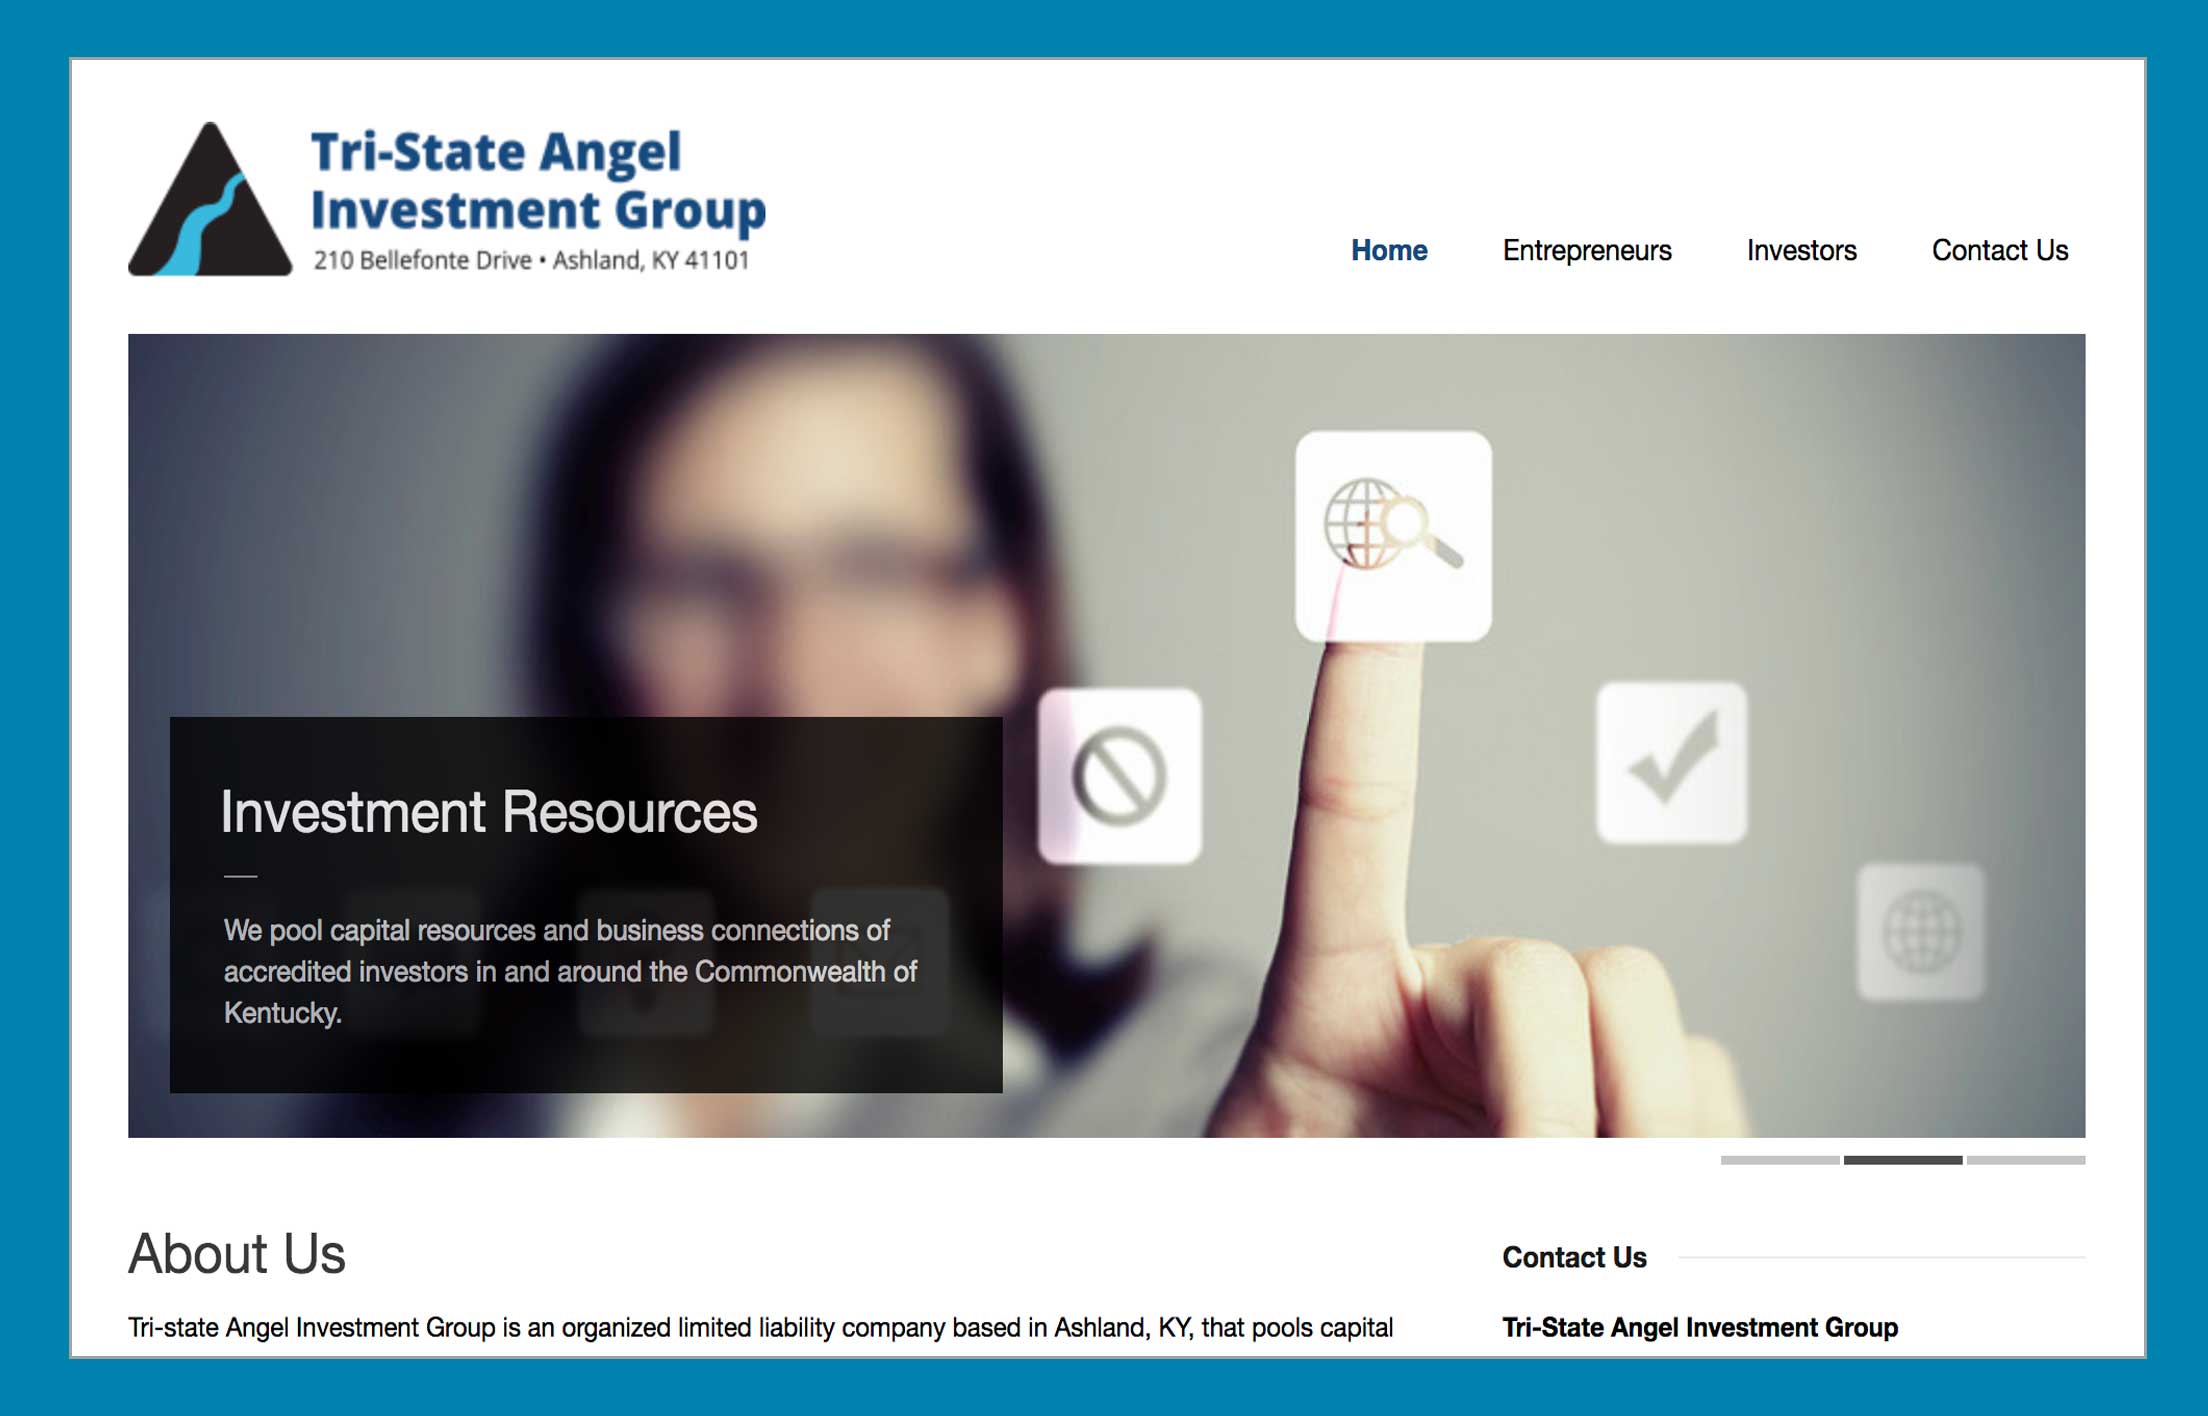 Tri-State Angel Investment